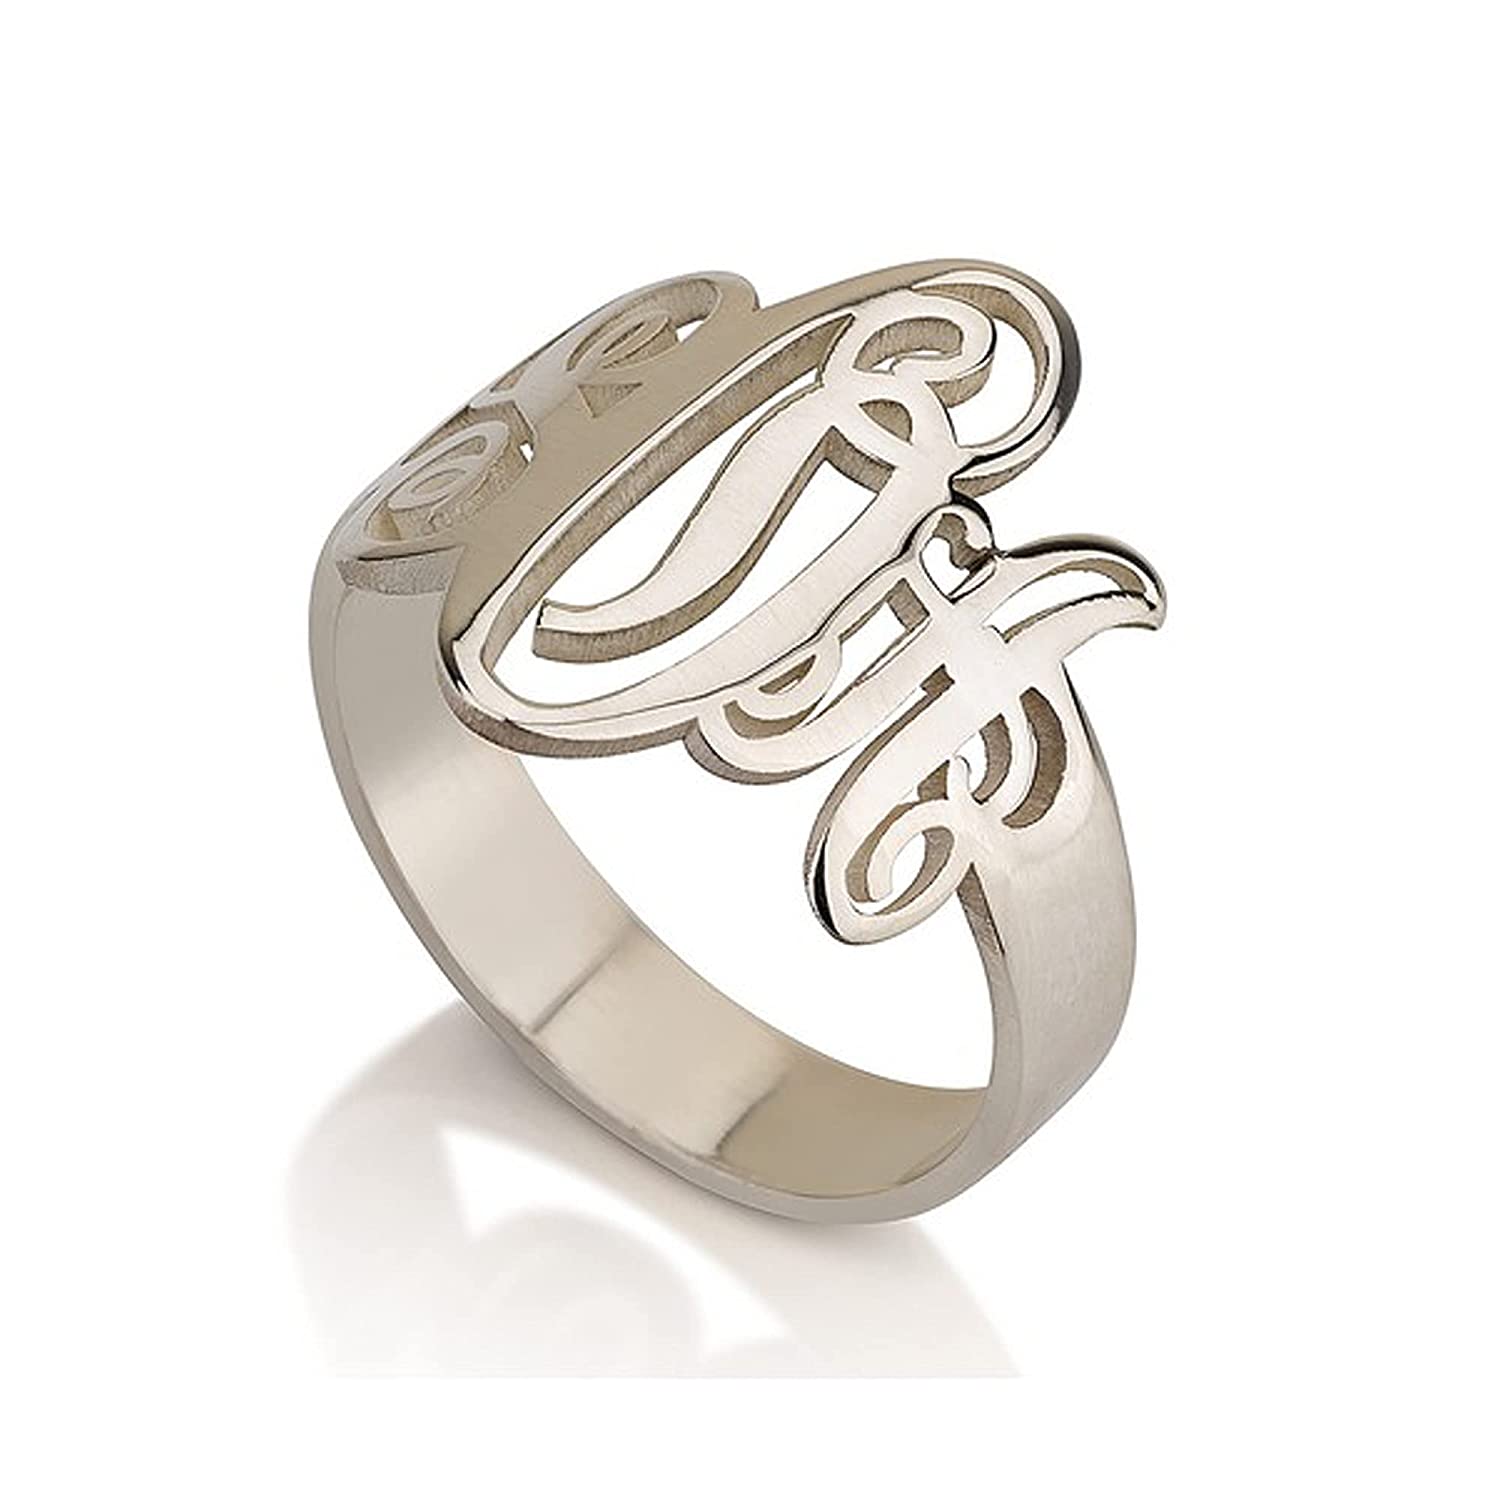 Hilis Jewelry Custom Made Monogram Ring - Any Initials Personalized Jewelry - Gift For Mom 925 Sterling Silver R51